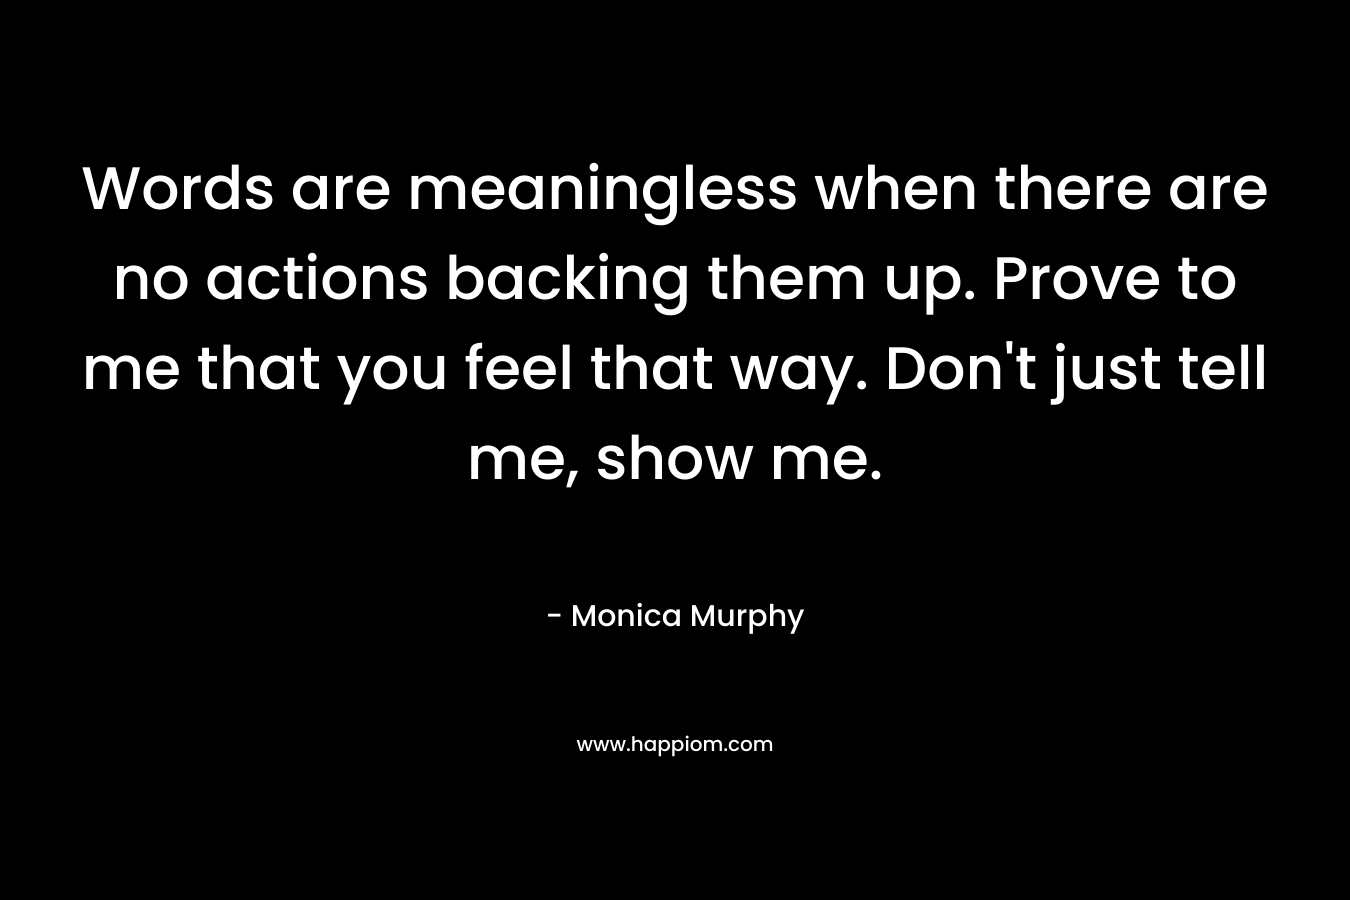 Words are meaningless when there are no actions backing them up. Prove to me that you feel that way. Don't just tell me, show me.